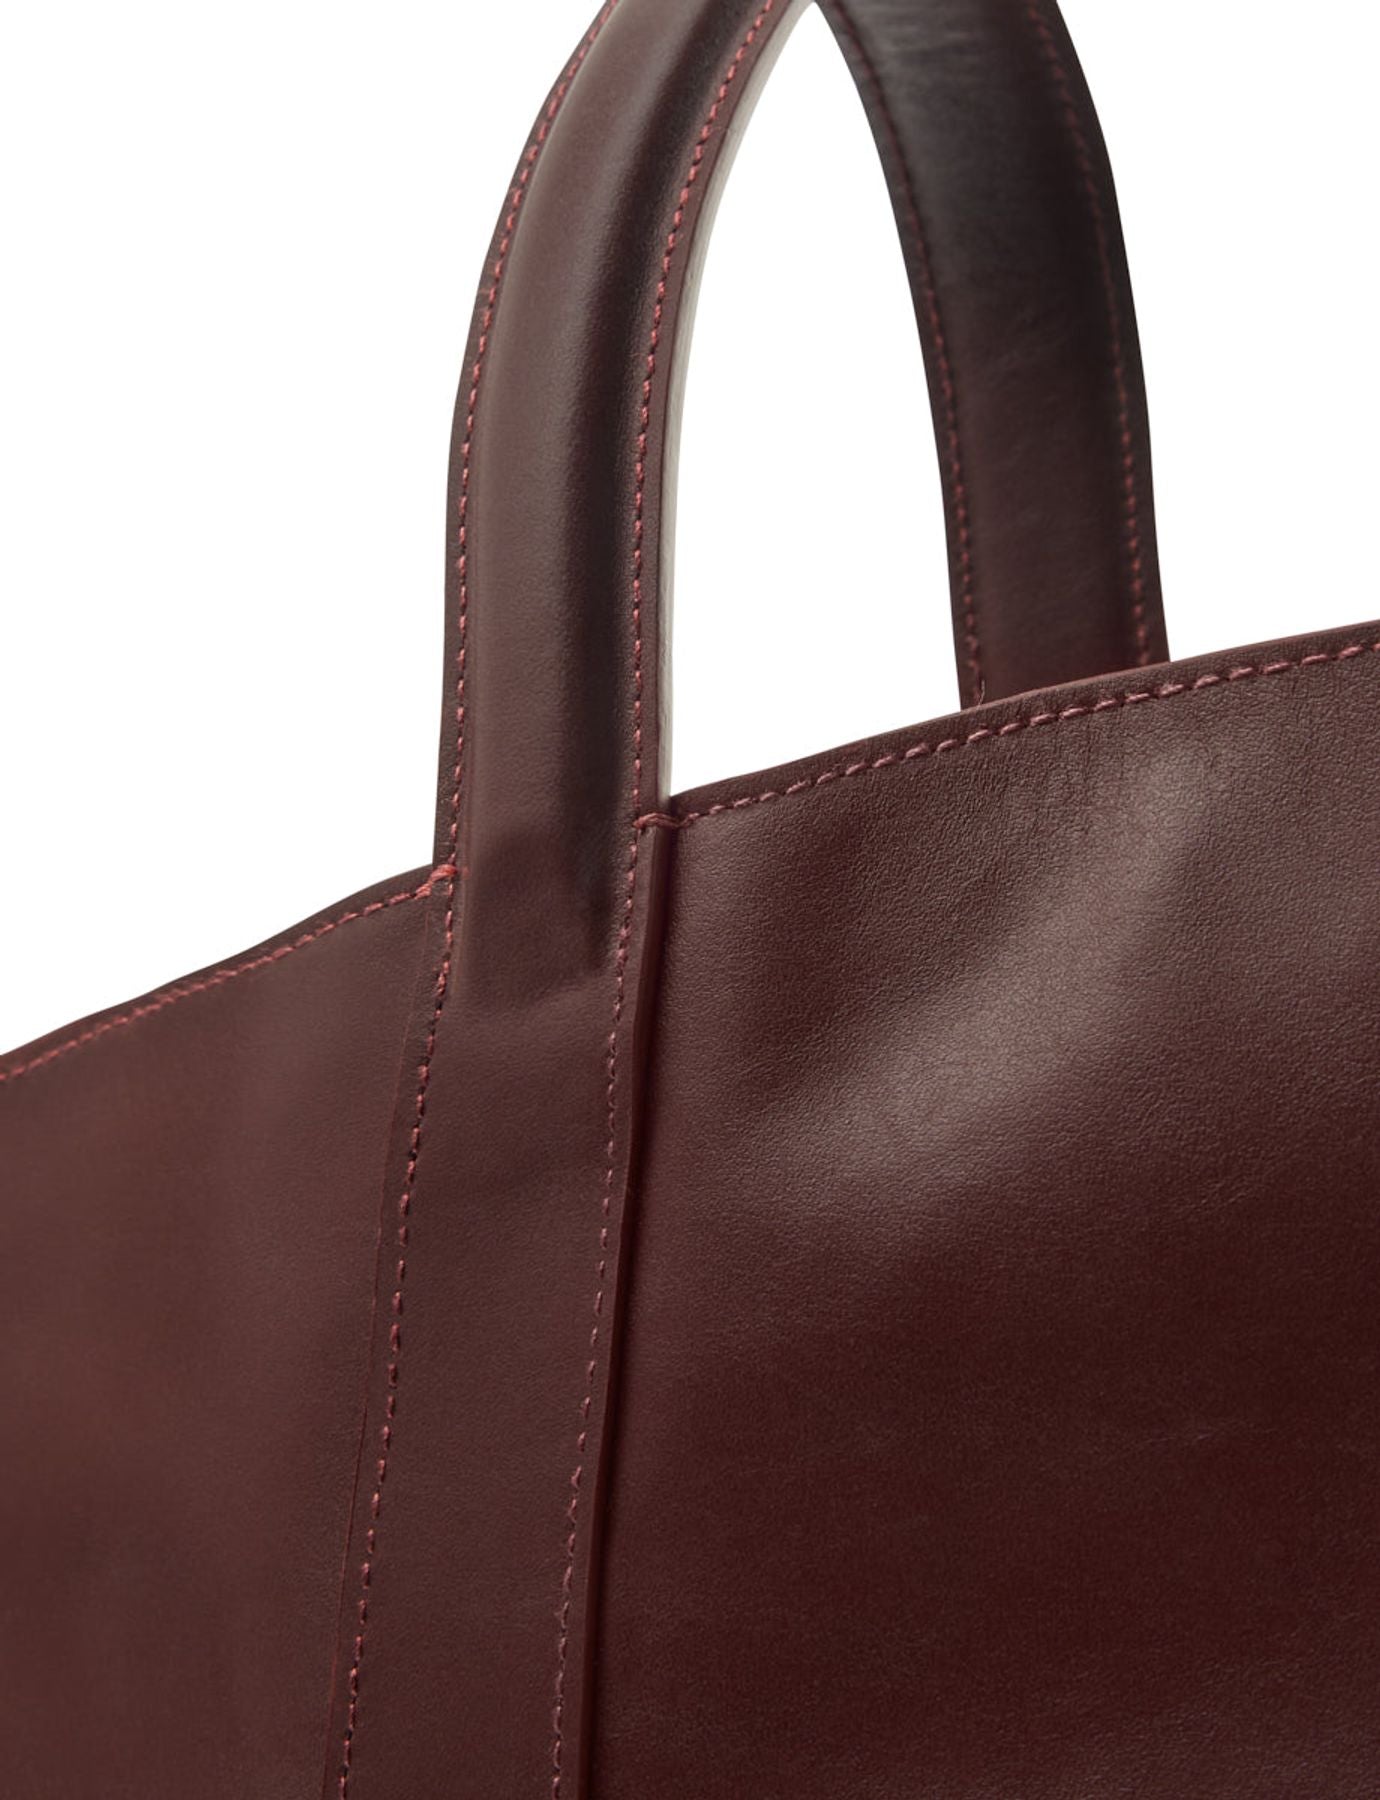 bag-leonore-size-s-in-leather-bordeaux